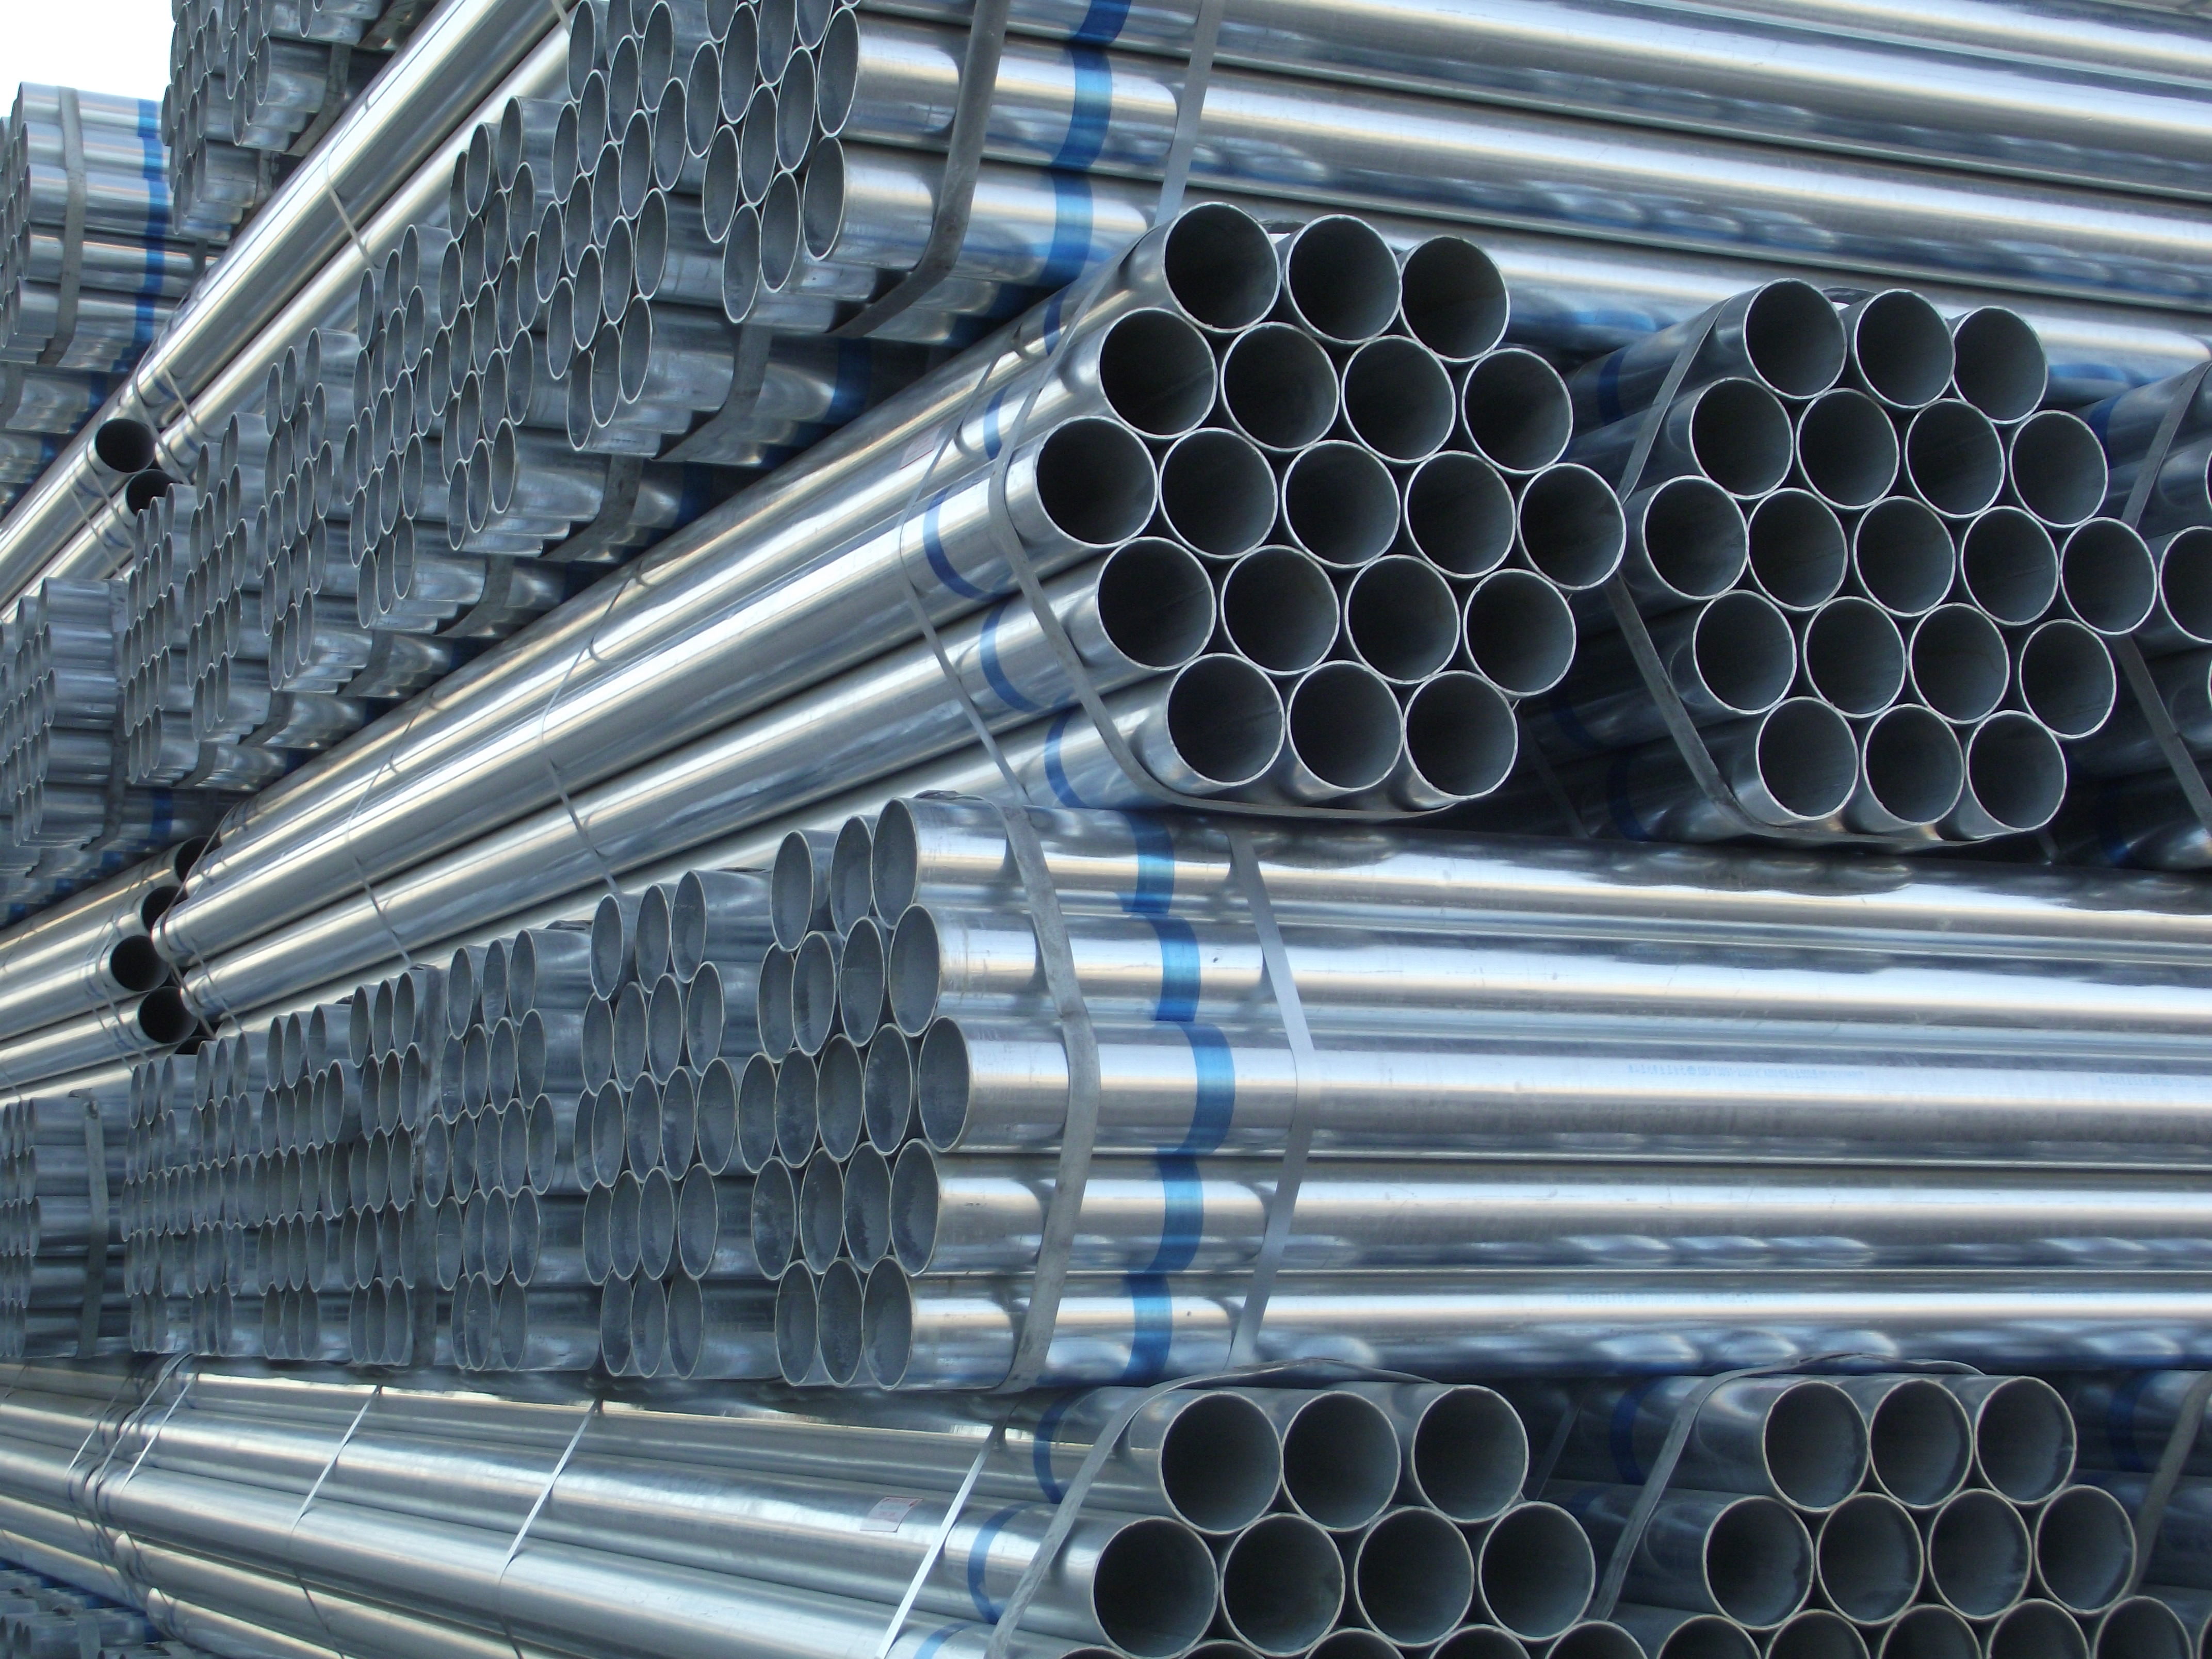 Low price for Api 5l Gr.b Submerged Welded Spiral Pipe - DIN 2440 Steel Pipe made in China by Tianjin Youfa Steel Pipe Group – Youfa